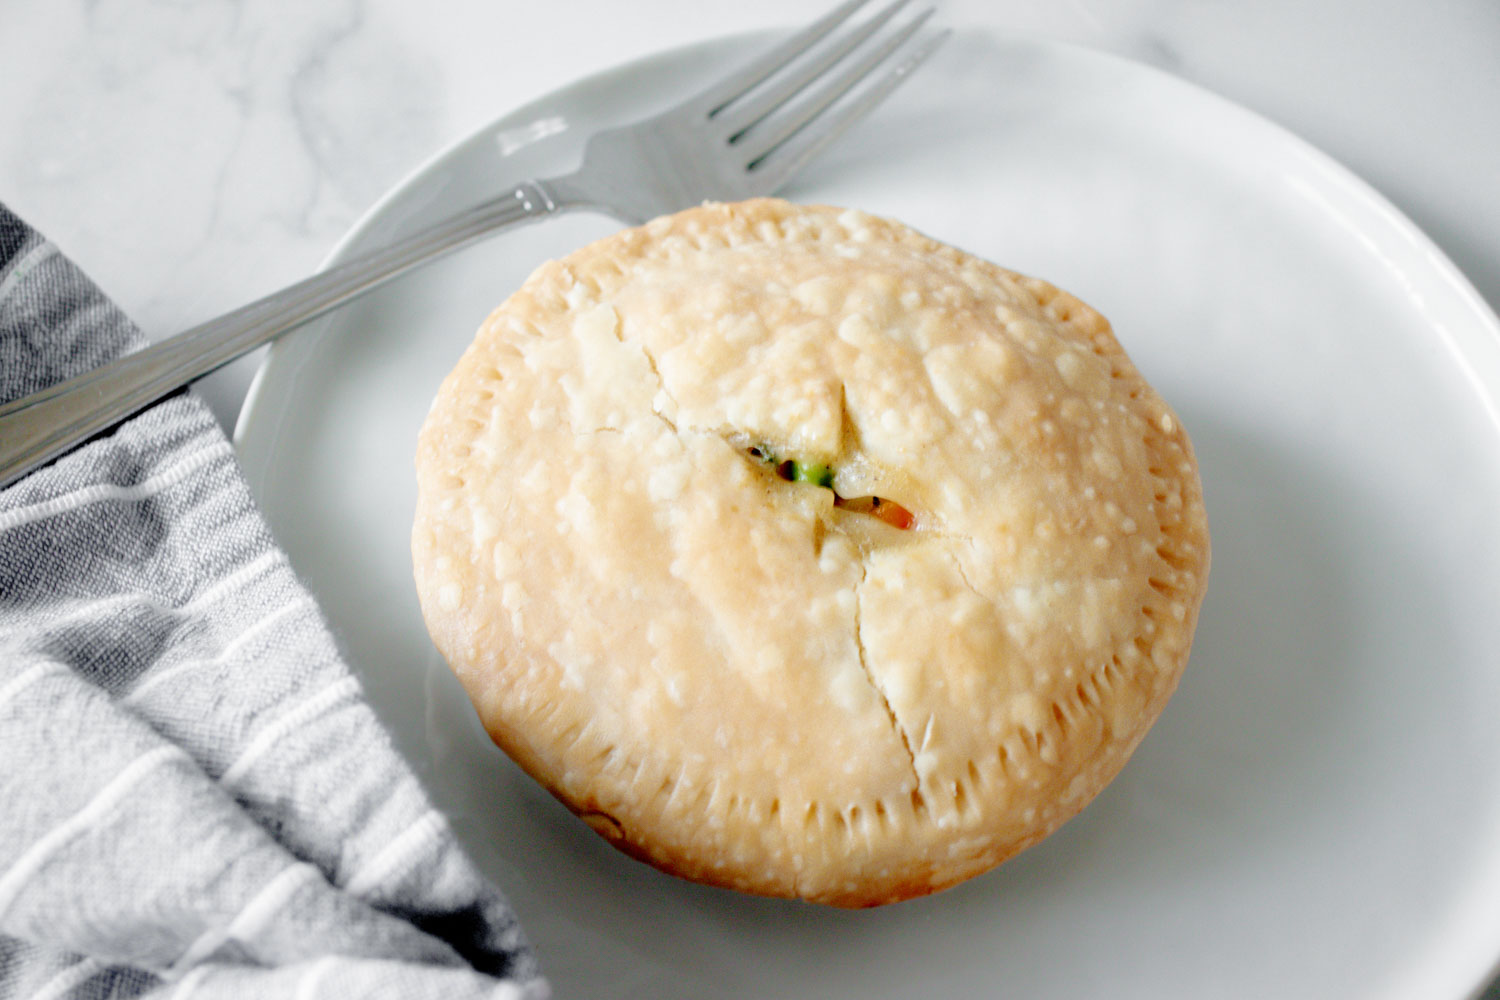 One mini chicken pot pie on a white plate with a silver fork and a gray and white striped towel on the side.